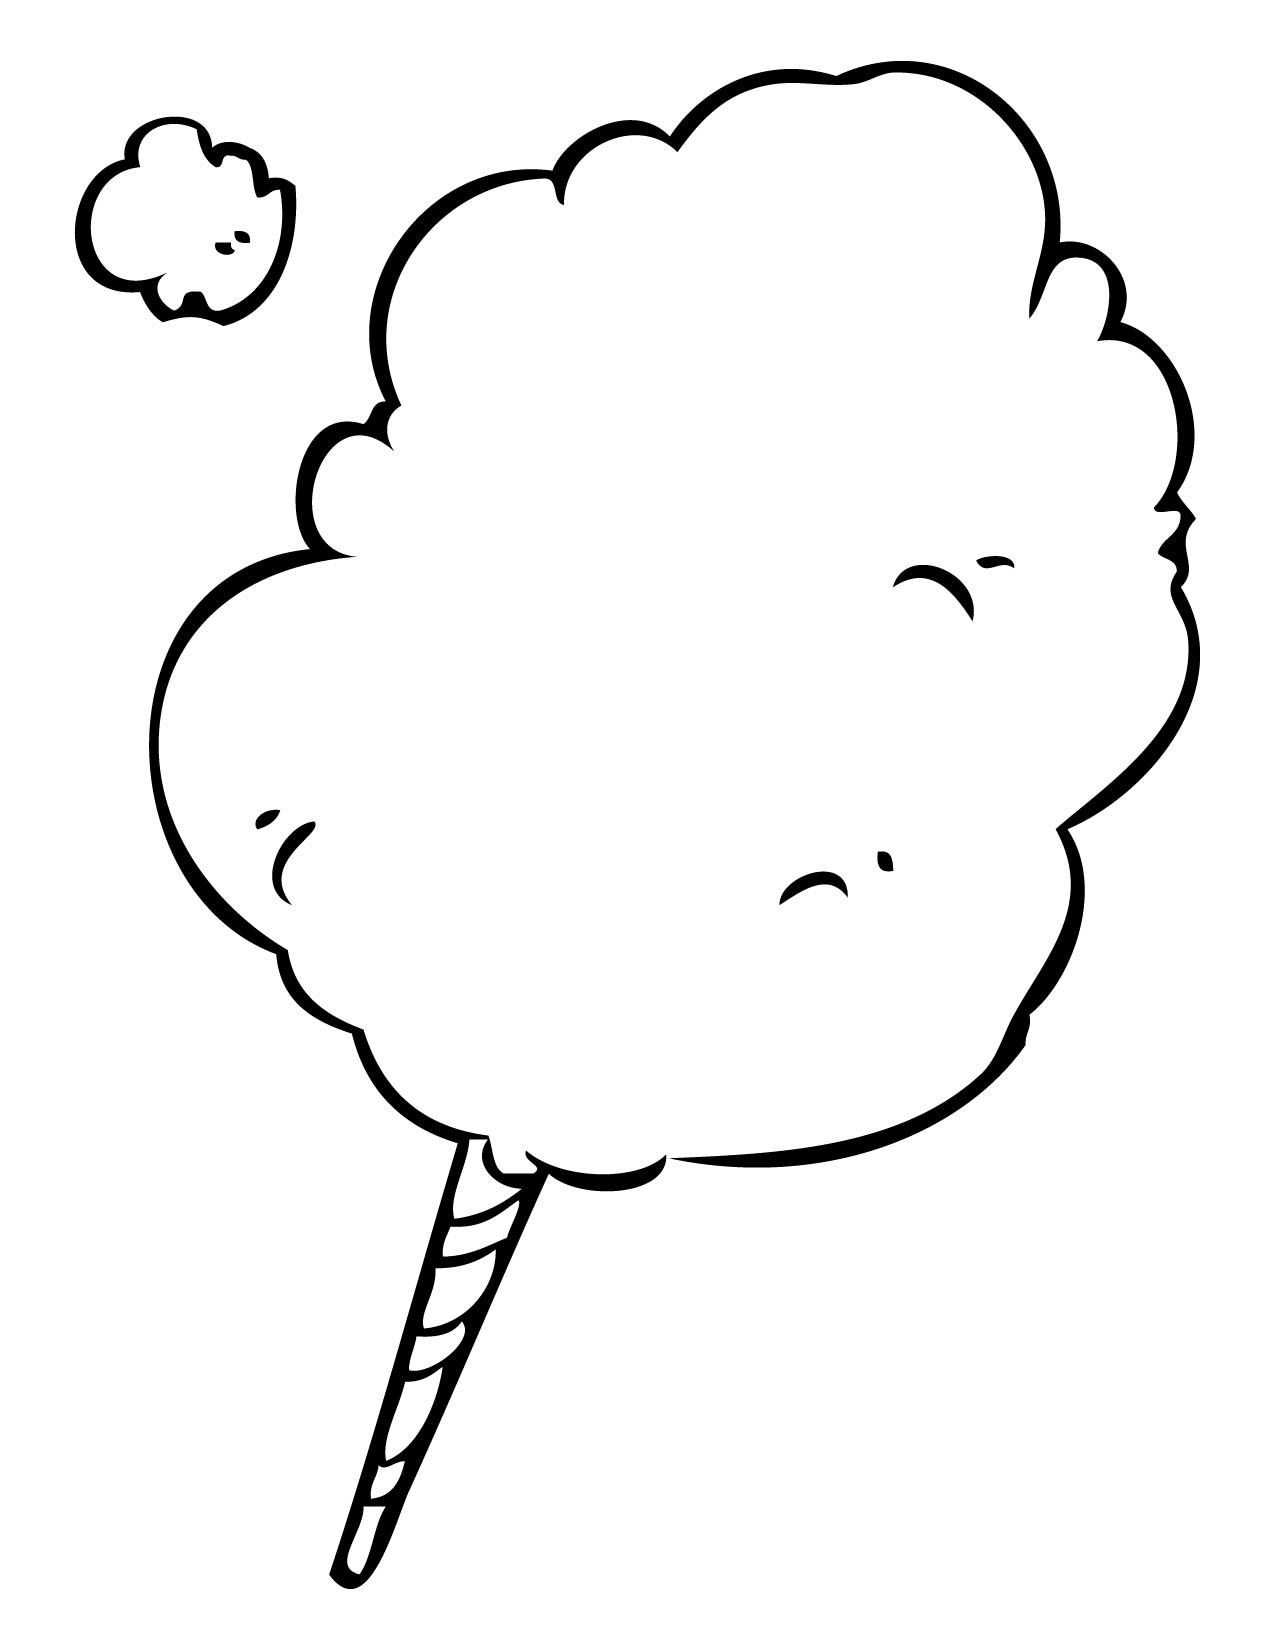 Cotton Candy Coloring Page - Handipoints - ClipArt Best - ClipArt Best